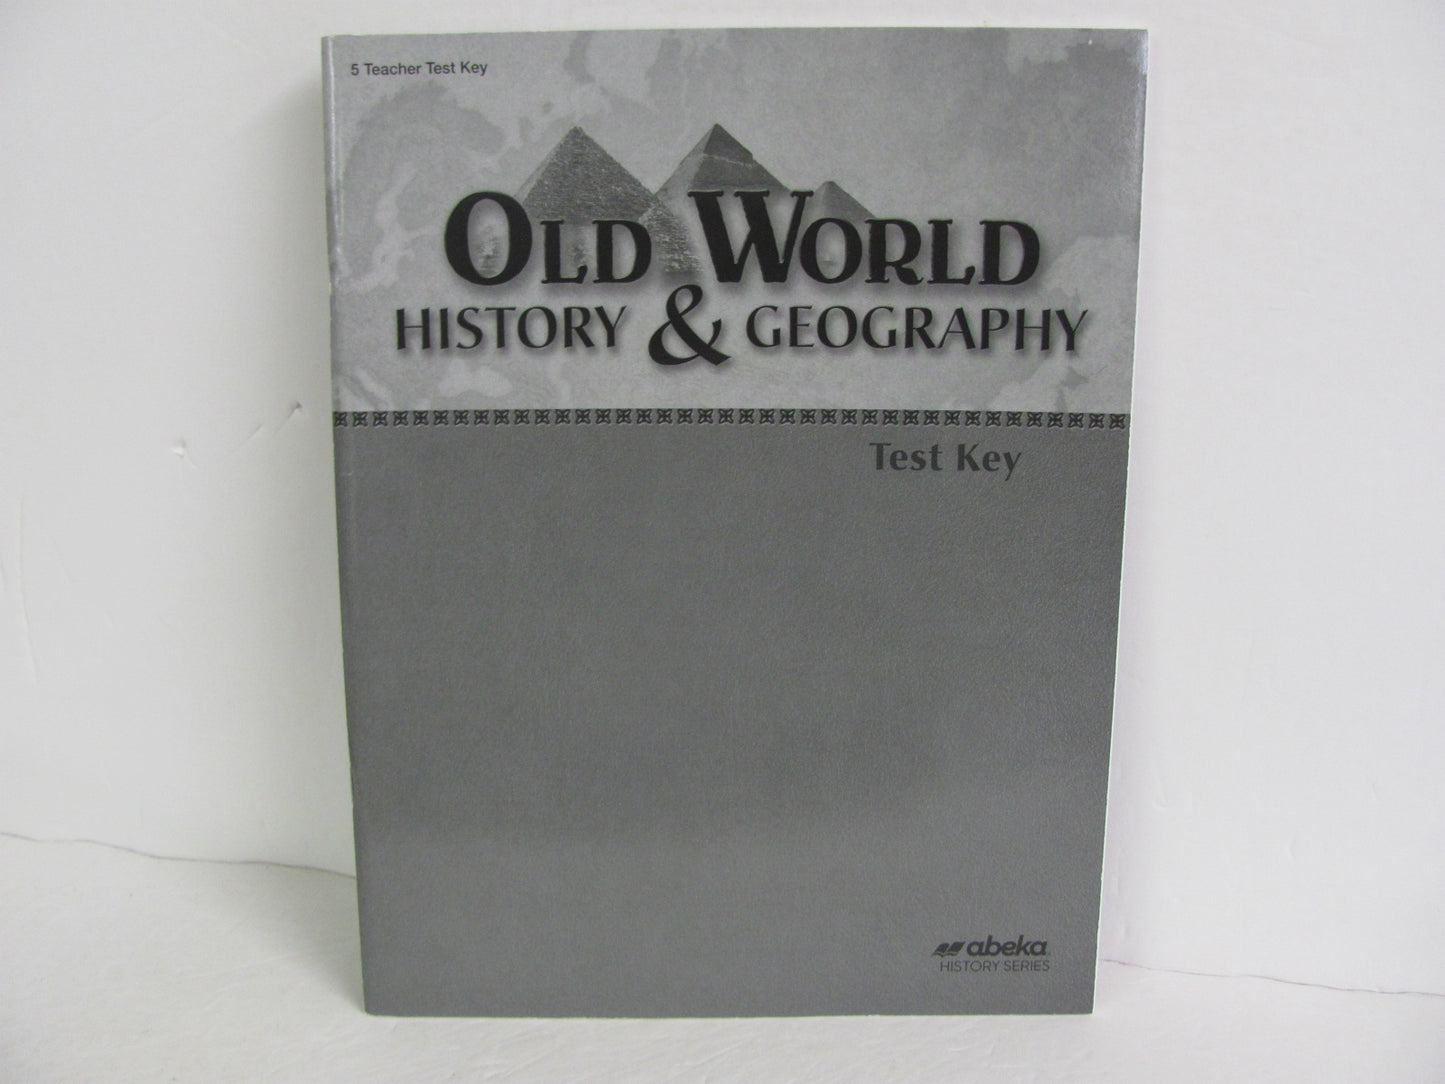 Old World History Abeka Test Key Pre-Owned 5th Grade History Textbooks